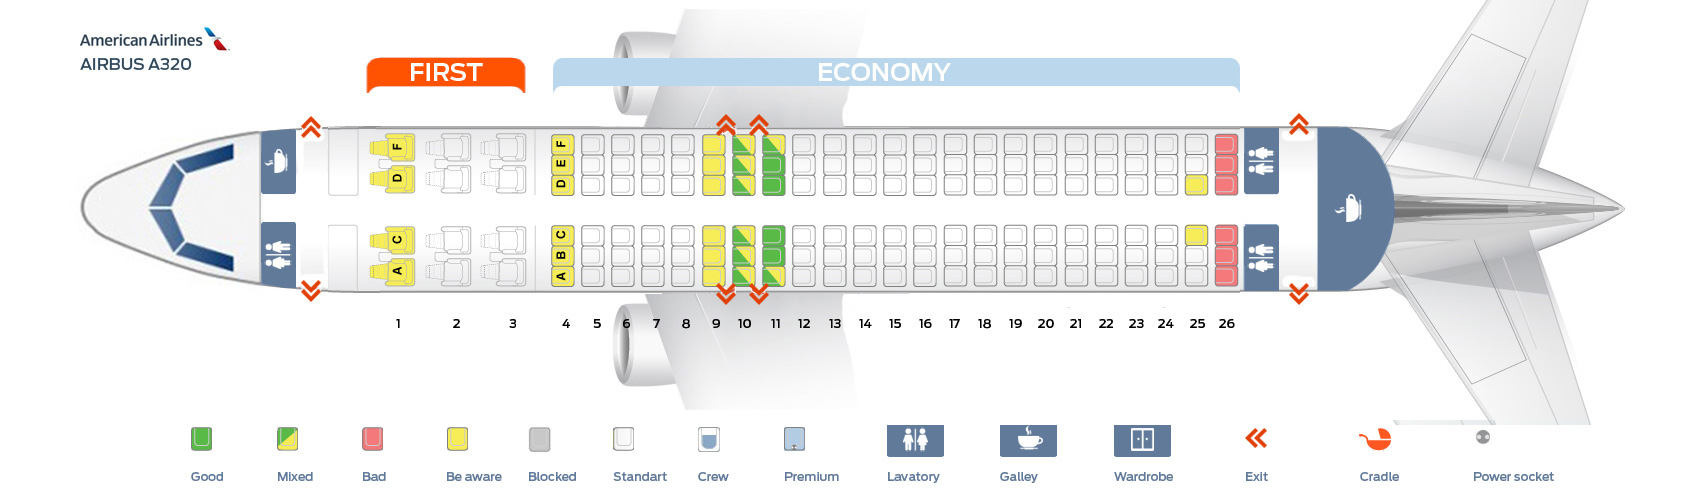 American Airlines Airplanes Seating Charts